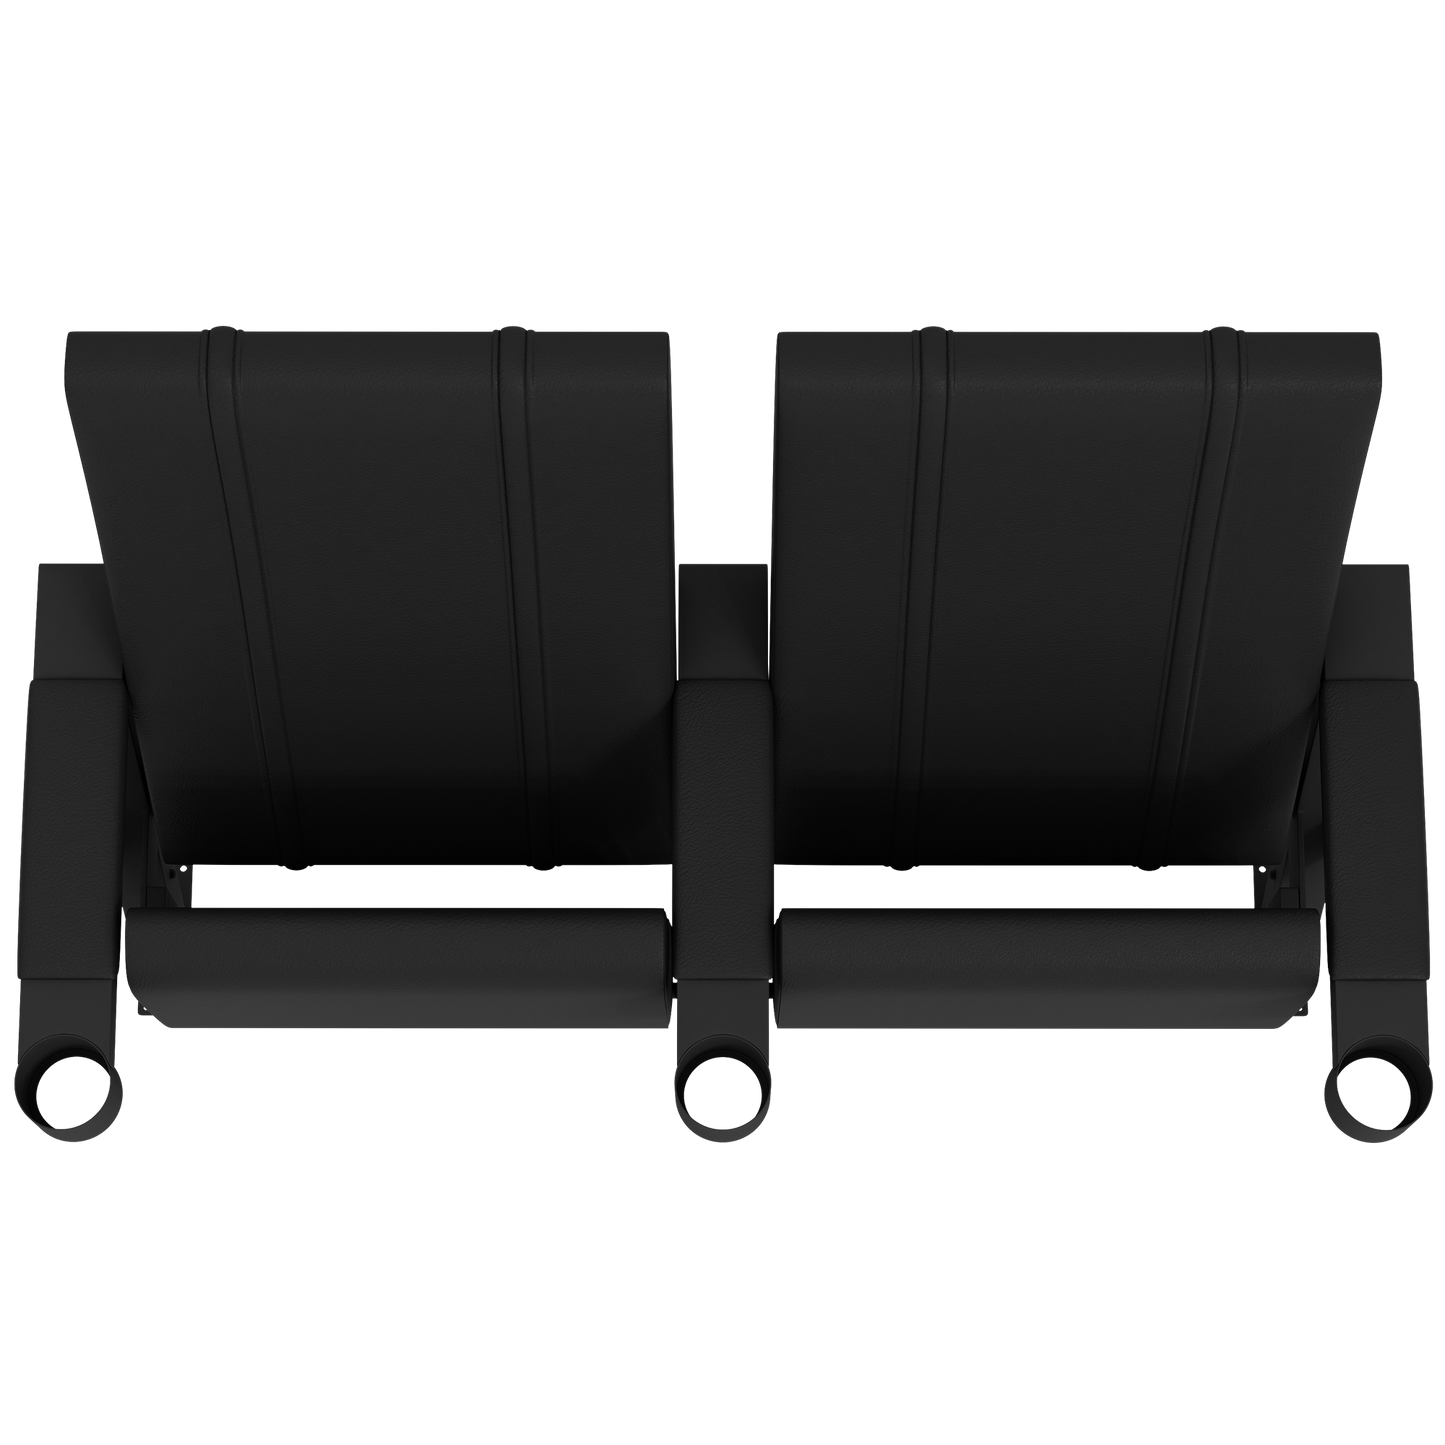 SuiteMax 3.5 VIP Seats with Chevrolet Alternate Logo